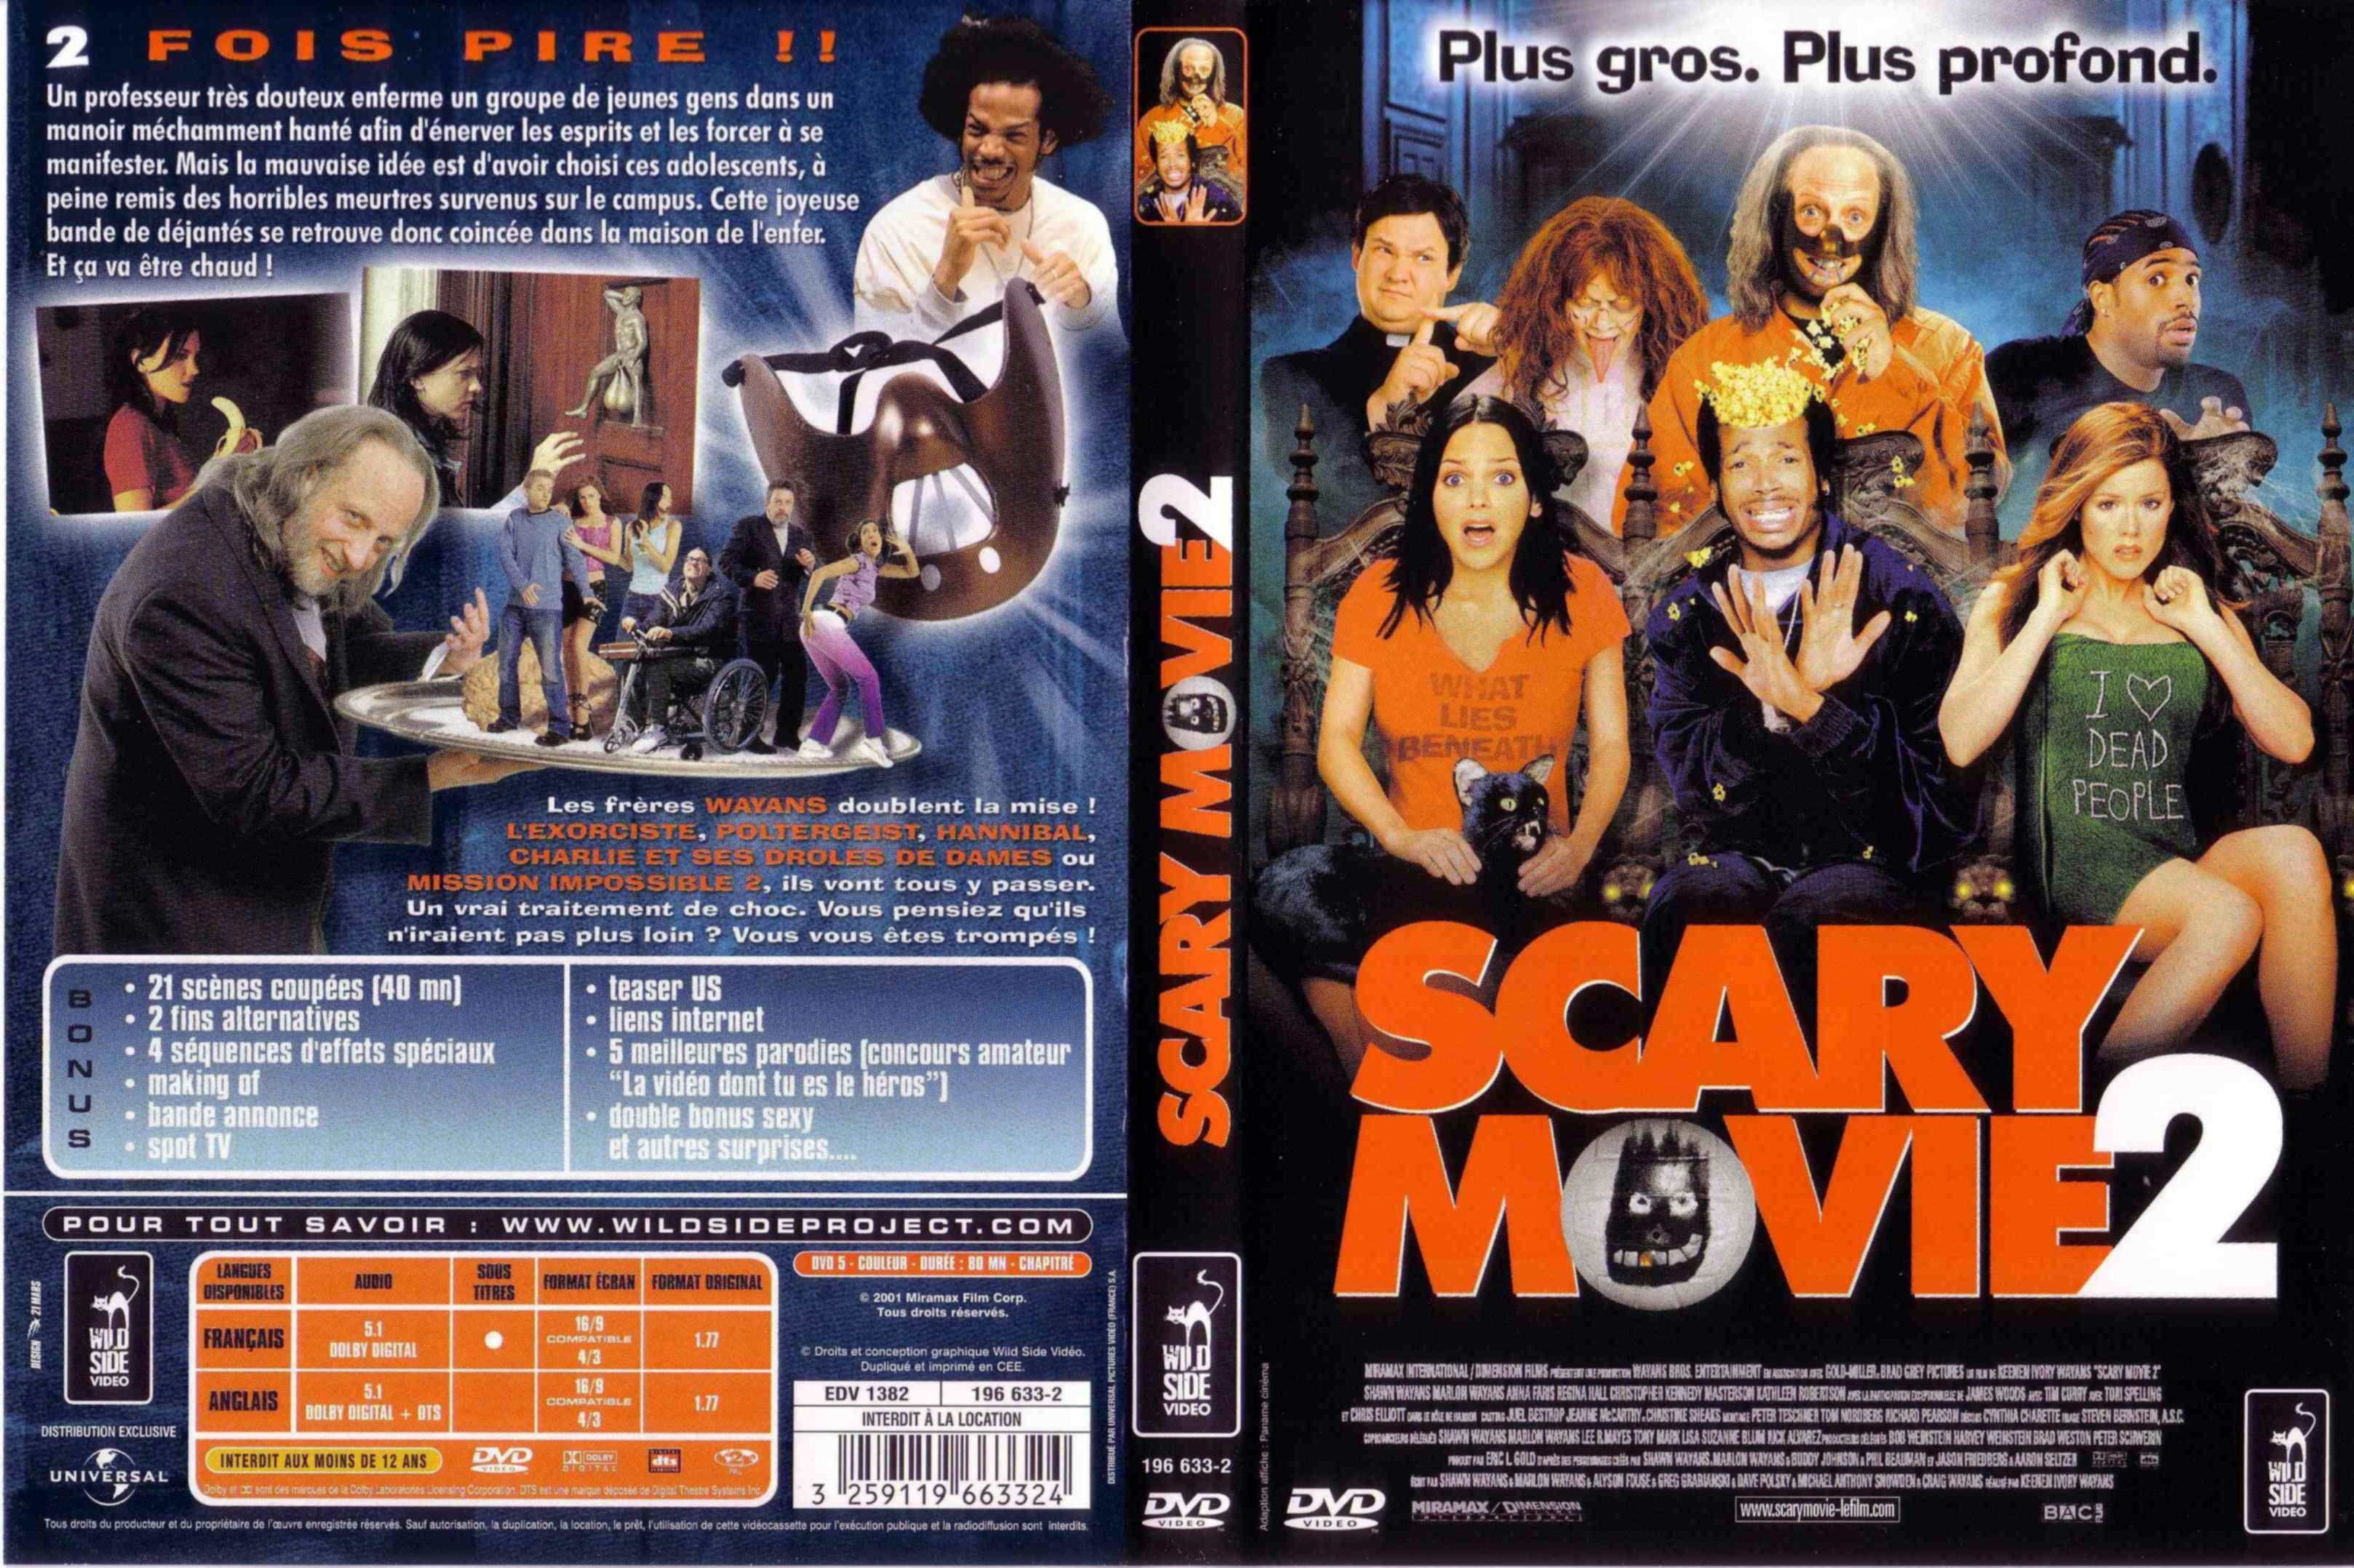 Jaquette DVD Scary movie 2